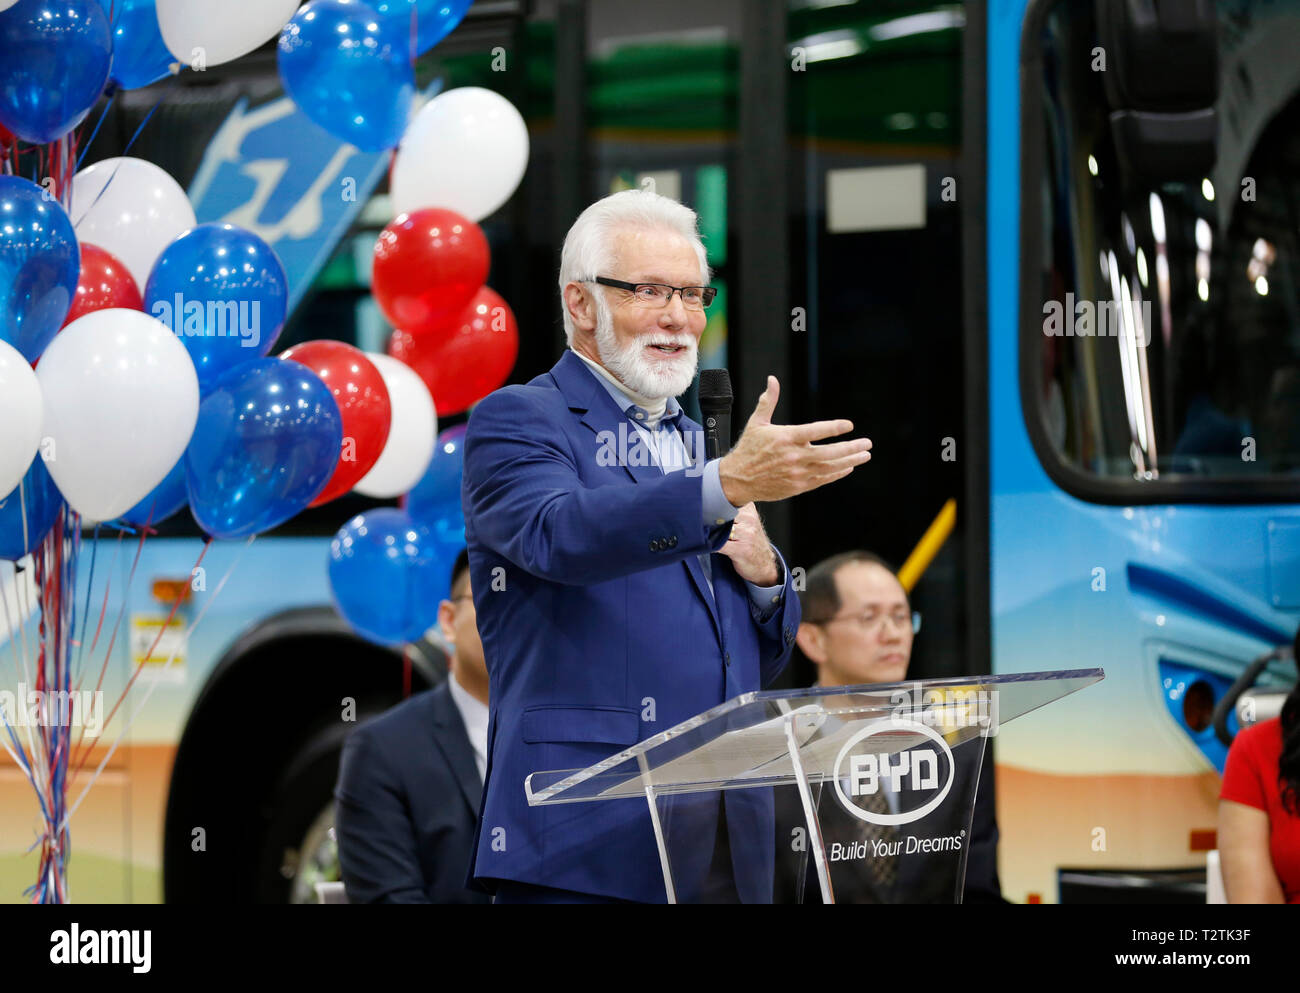 (190404) -- LANCASTER, April 4, 2019 (Xinhua) -- Lancaster Mayor R. Rex Parris delivers a speech at the 300th BYD electric bus offline ceremony in Lancaster, Los Angeles County, the United States, April 3, 2019. China's leading electric vehicle maker BYD said on Wednesday that it has rolled out the 300th bus at its Lancaster manufacturing plant in the U.S. state of California, marking a milestone for production. The 300th bus, a 35-foot BYD K9S model transit bus, is one of three built for the Capital Area Transit System of Baton Rouge, capital of the U.S. state of Louisiana, the company sa Stock Photo